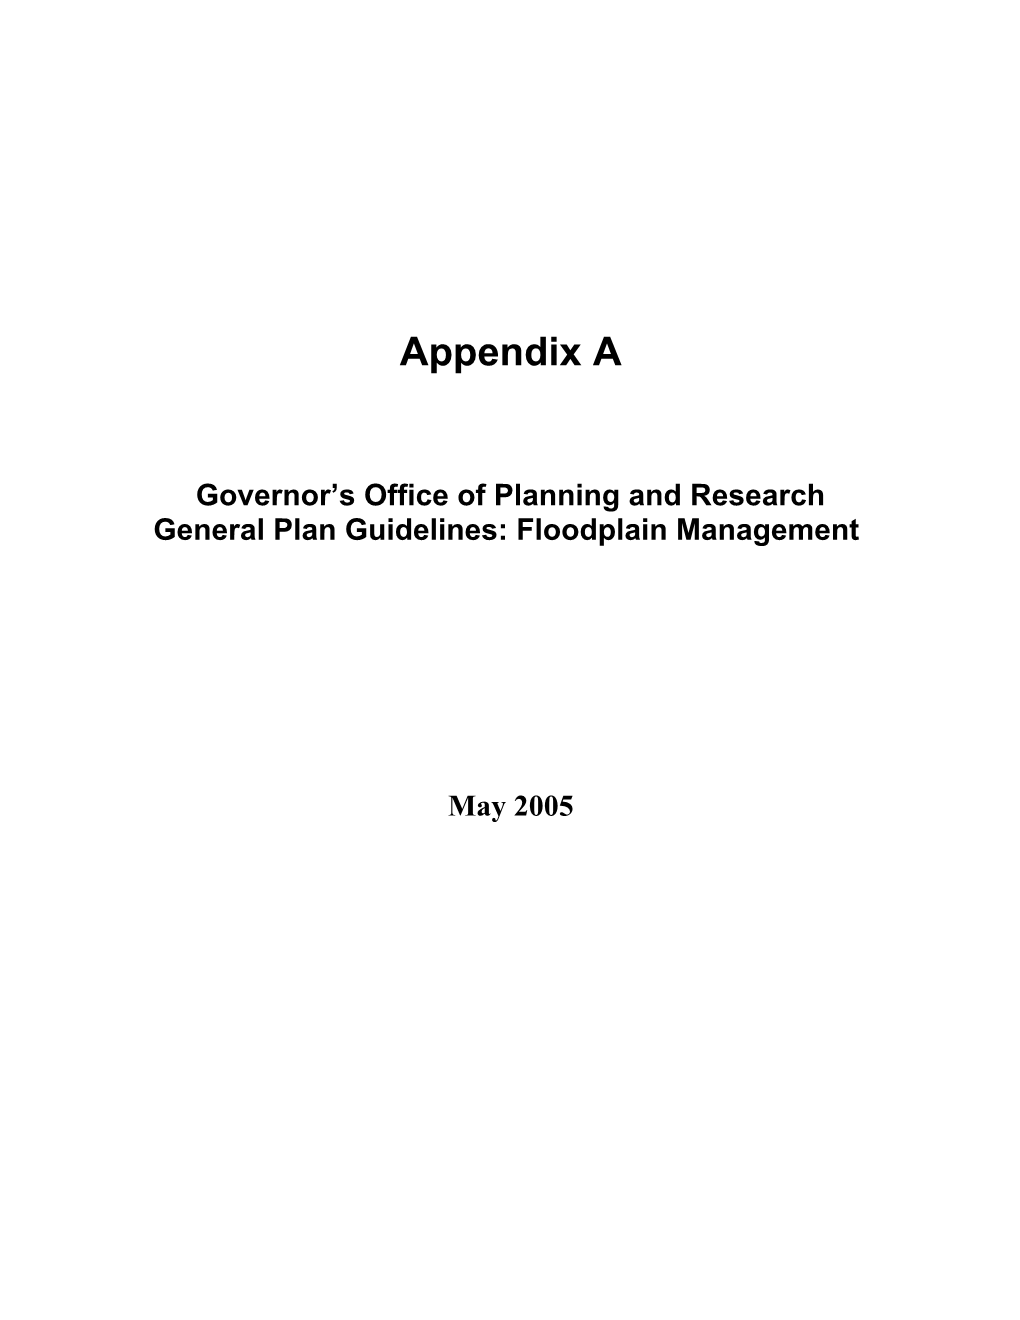 Governor S Office of Planning and Research